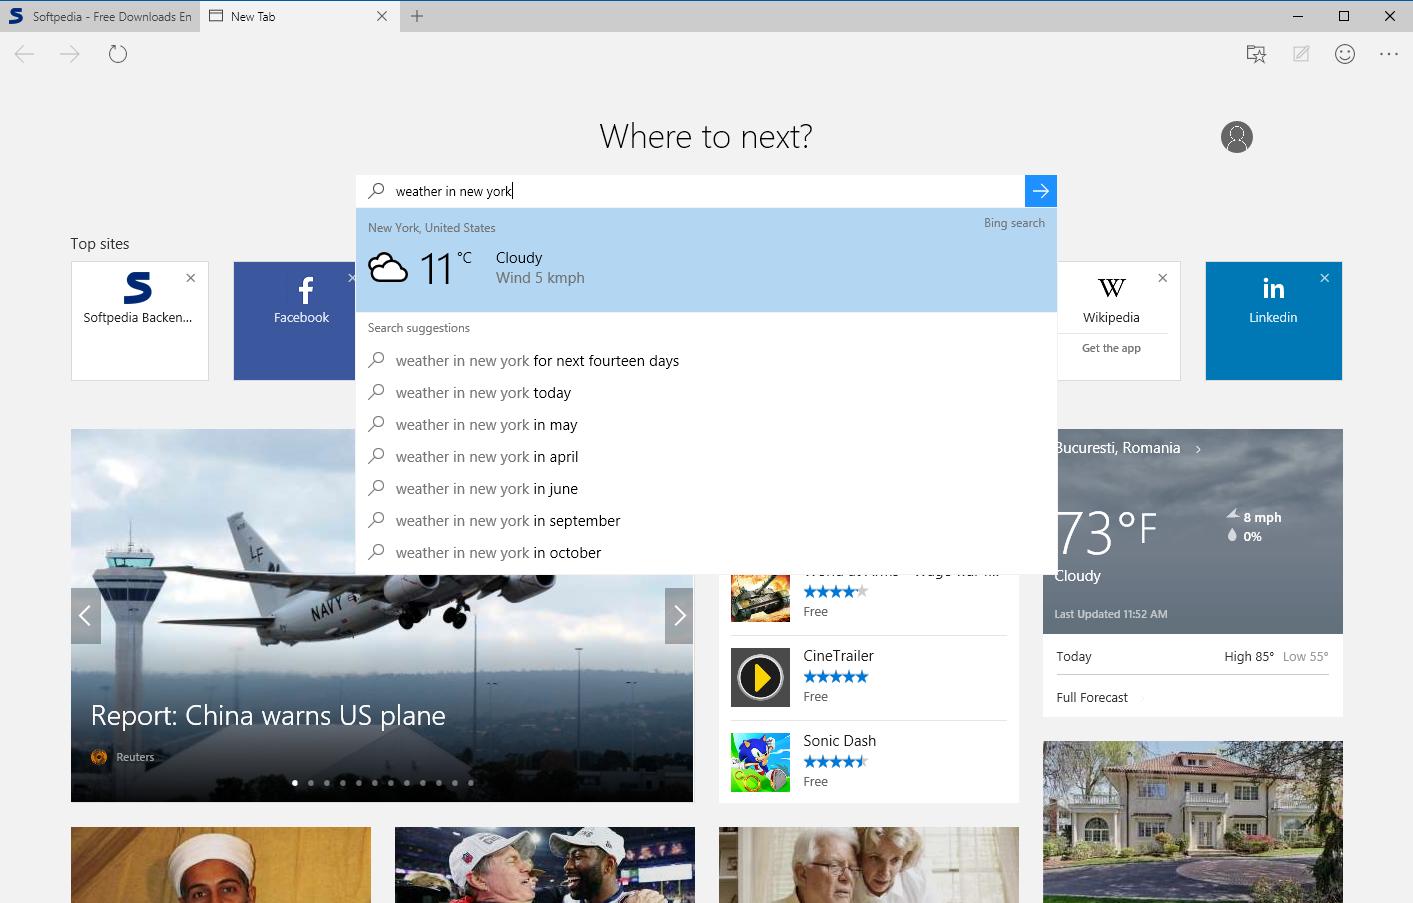 Introducing Microsoft Edge The New Windows 10 Browser Images